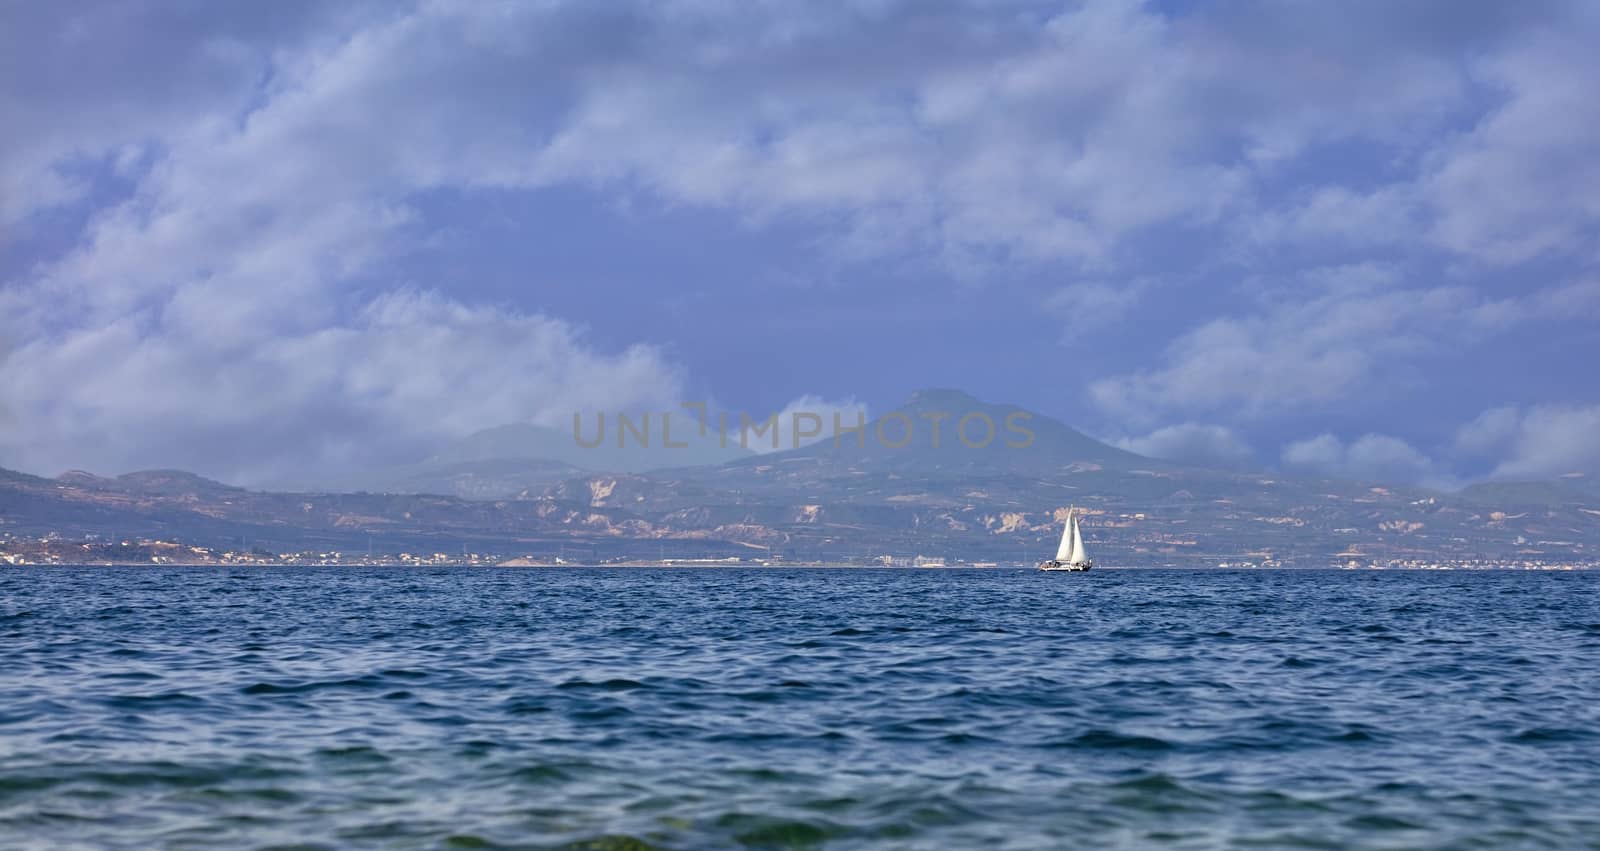 Silhouette of a sailing yacht on the horizon against the backdrop of Mount Acropolis in Corinth in the morning haze.